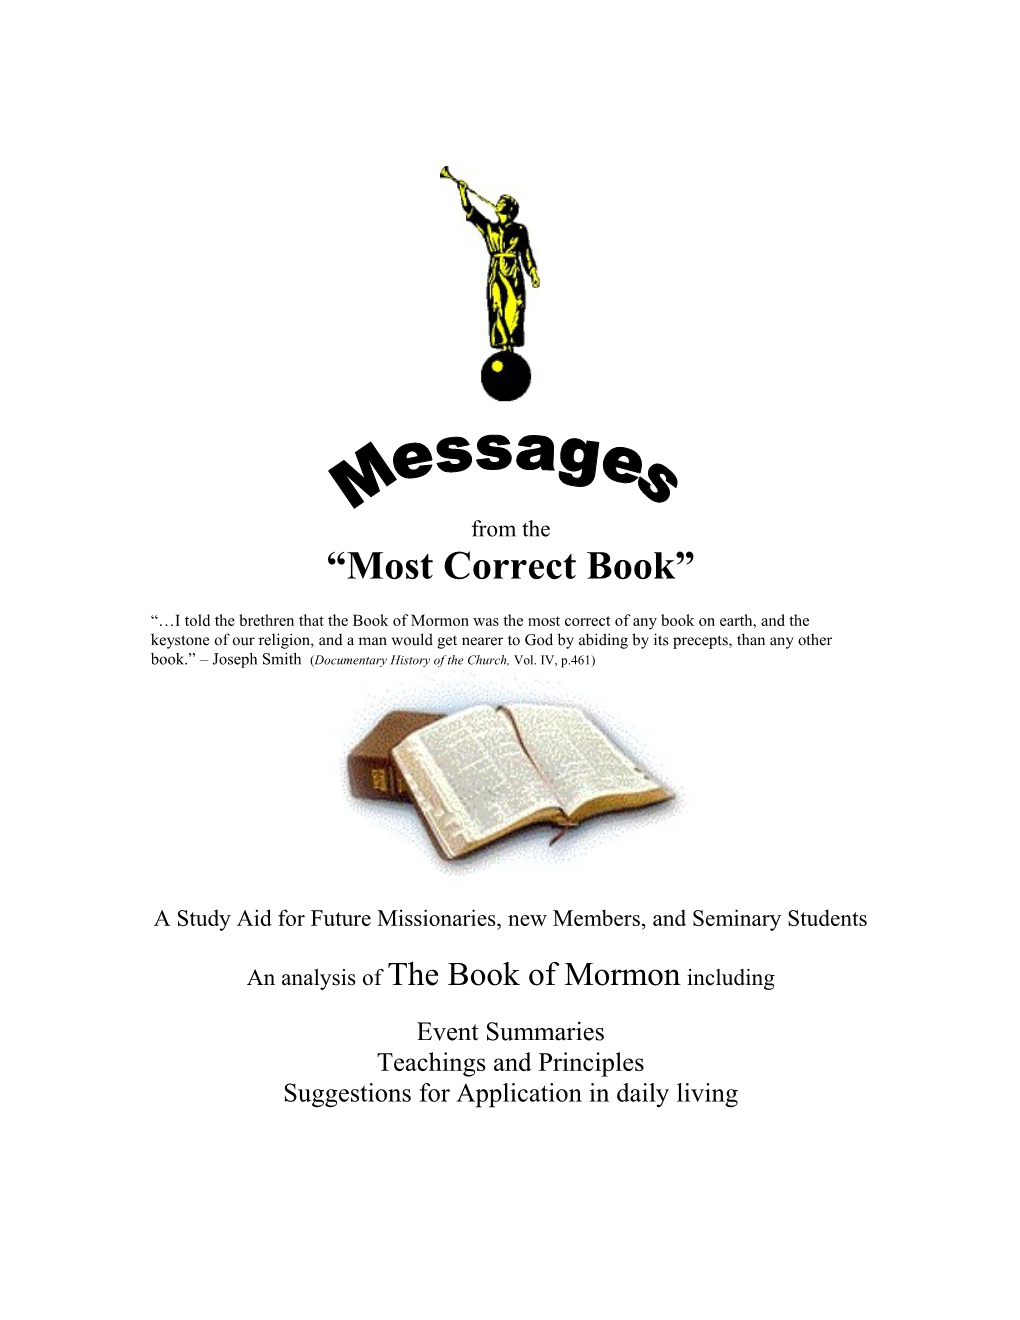 An Analysis of the Book of Mormon Including